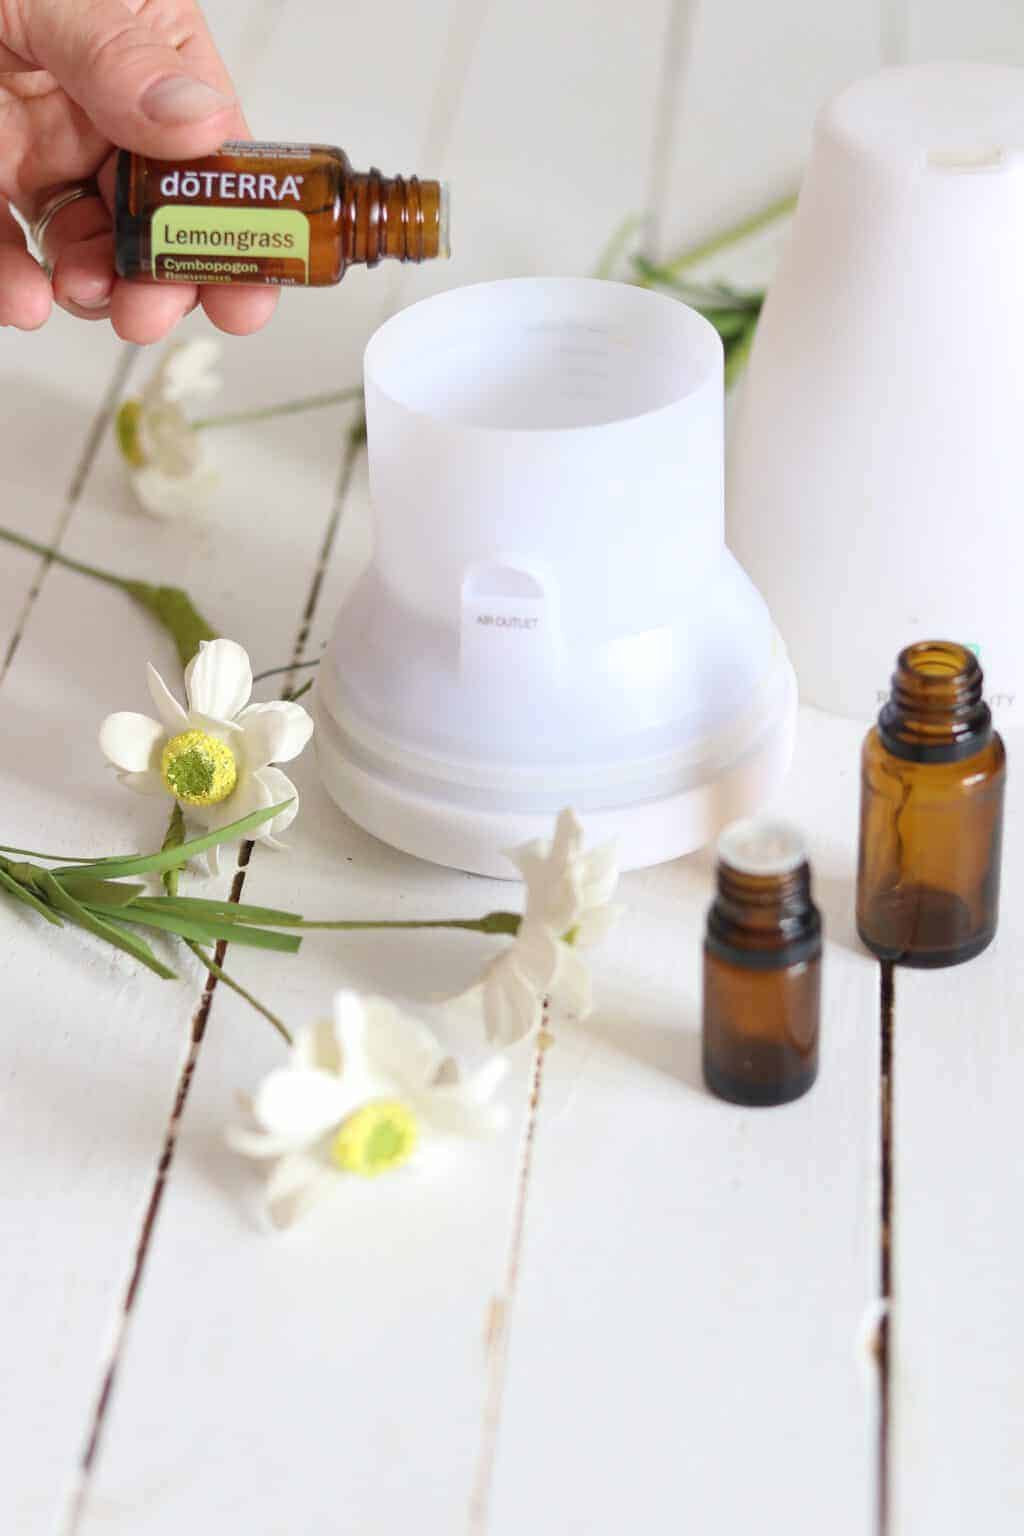 Lemongrass essential oil, diffuser, flowers, and amber bottles on table.